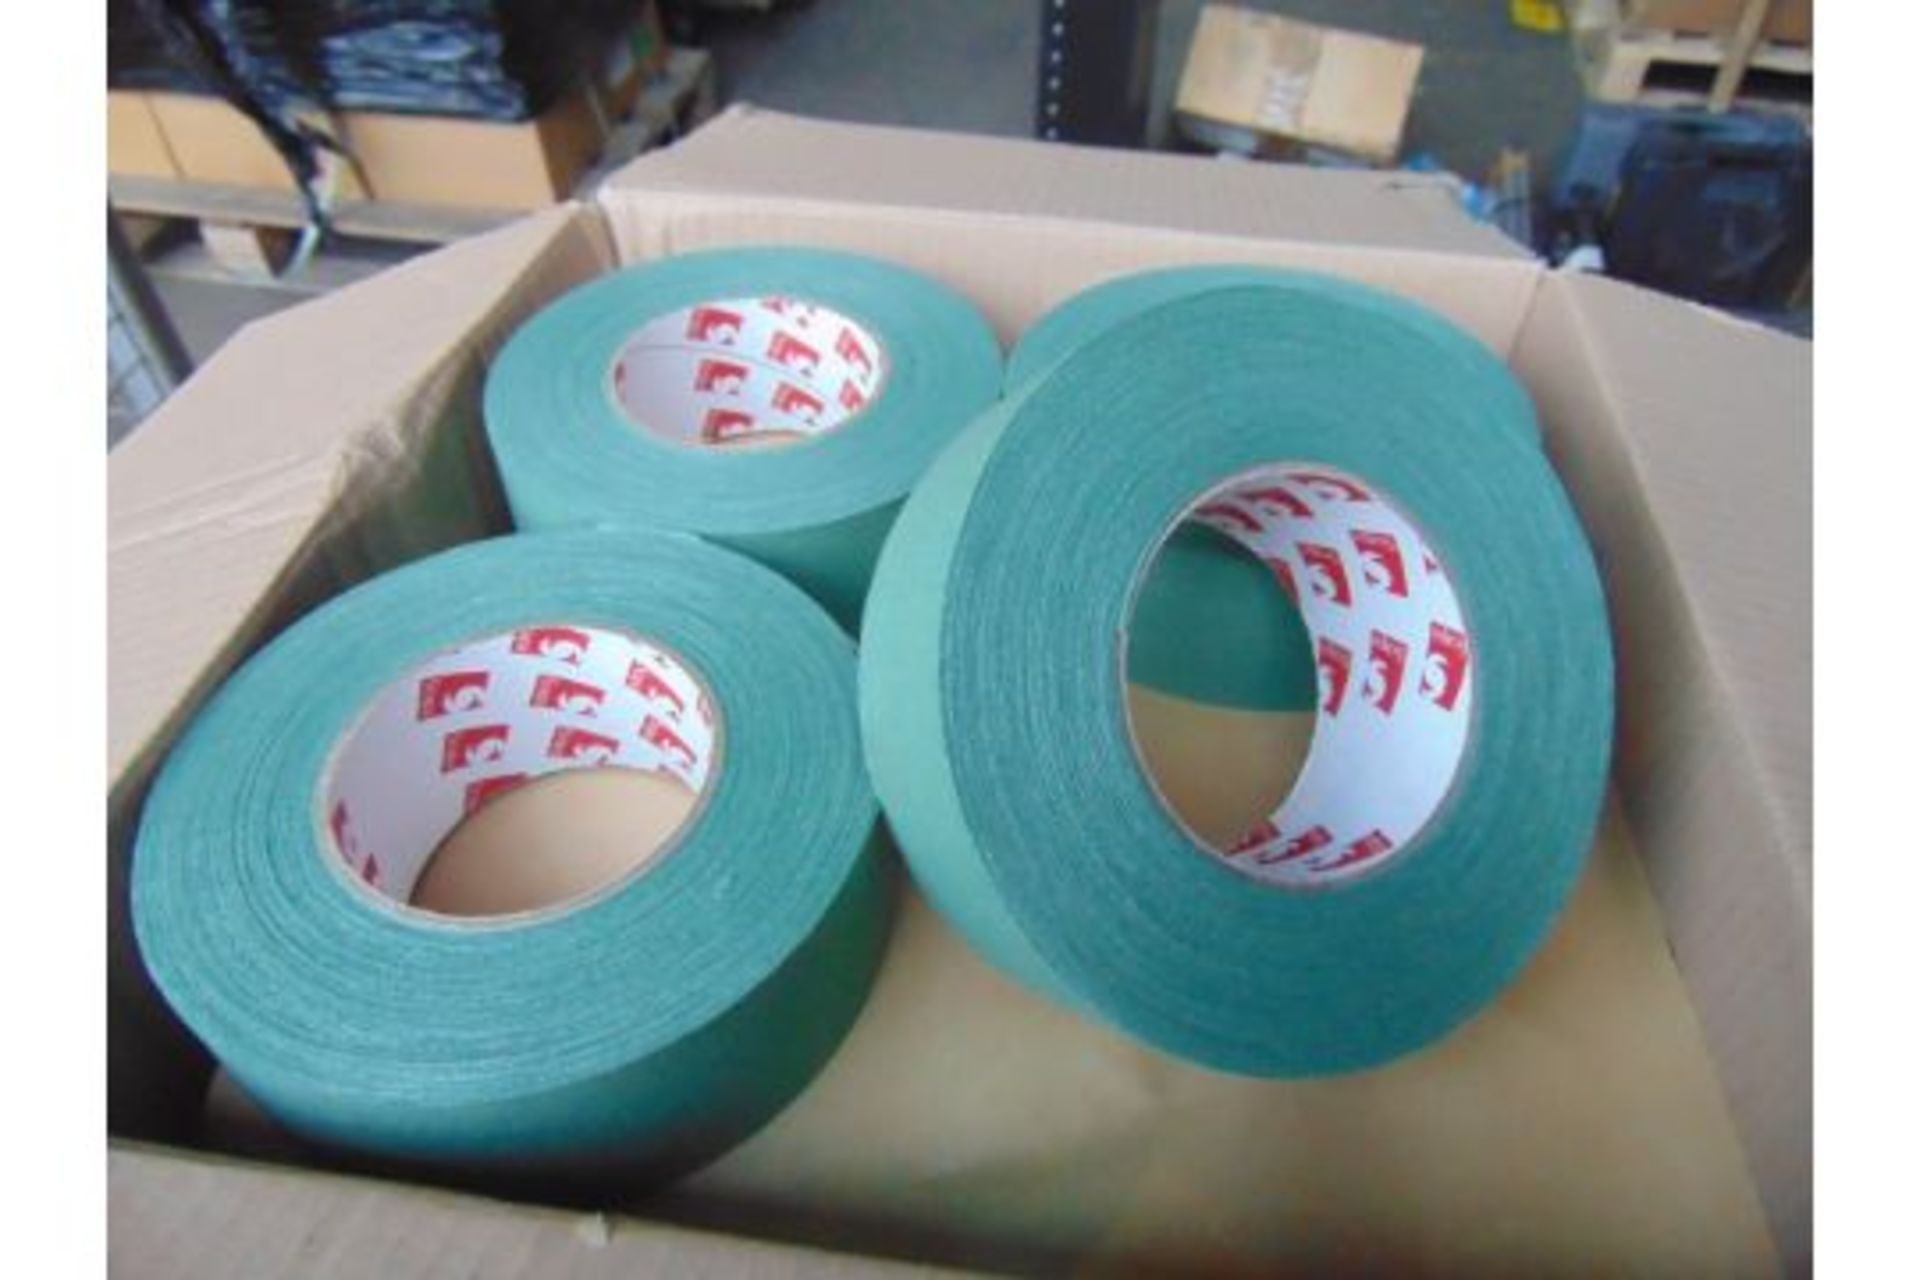 16 Rolls of New Unissued Green Linen Cloth Scapa Adhesive Tape 50m x 50m Roll - Image 2 of 6